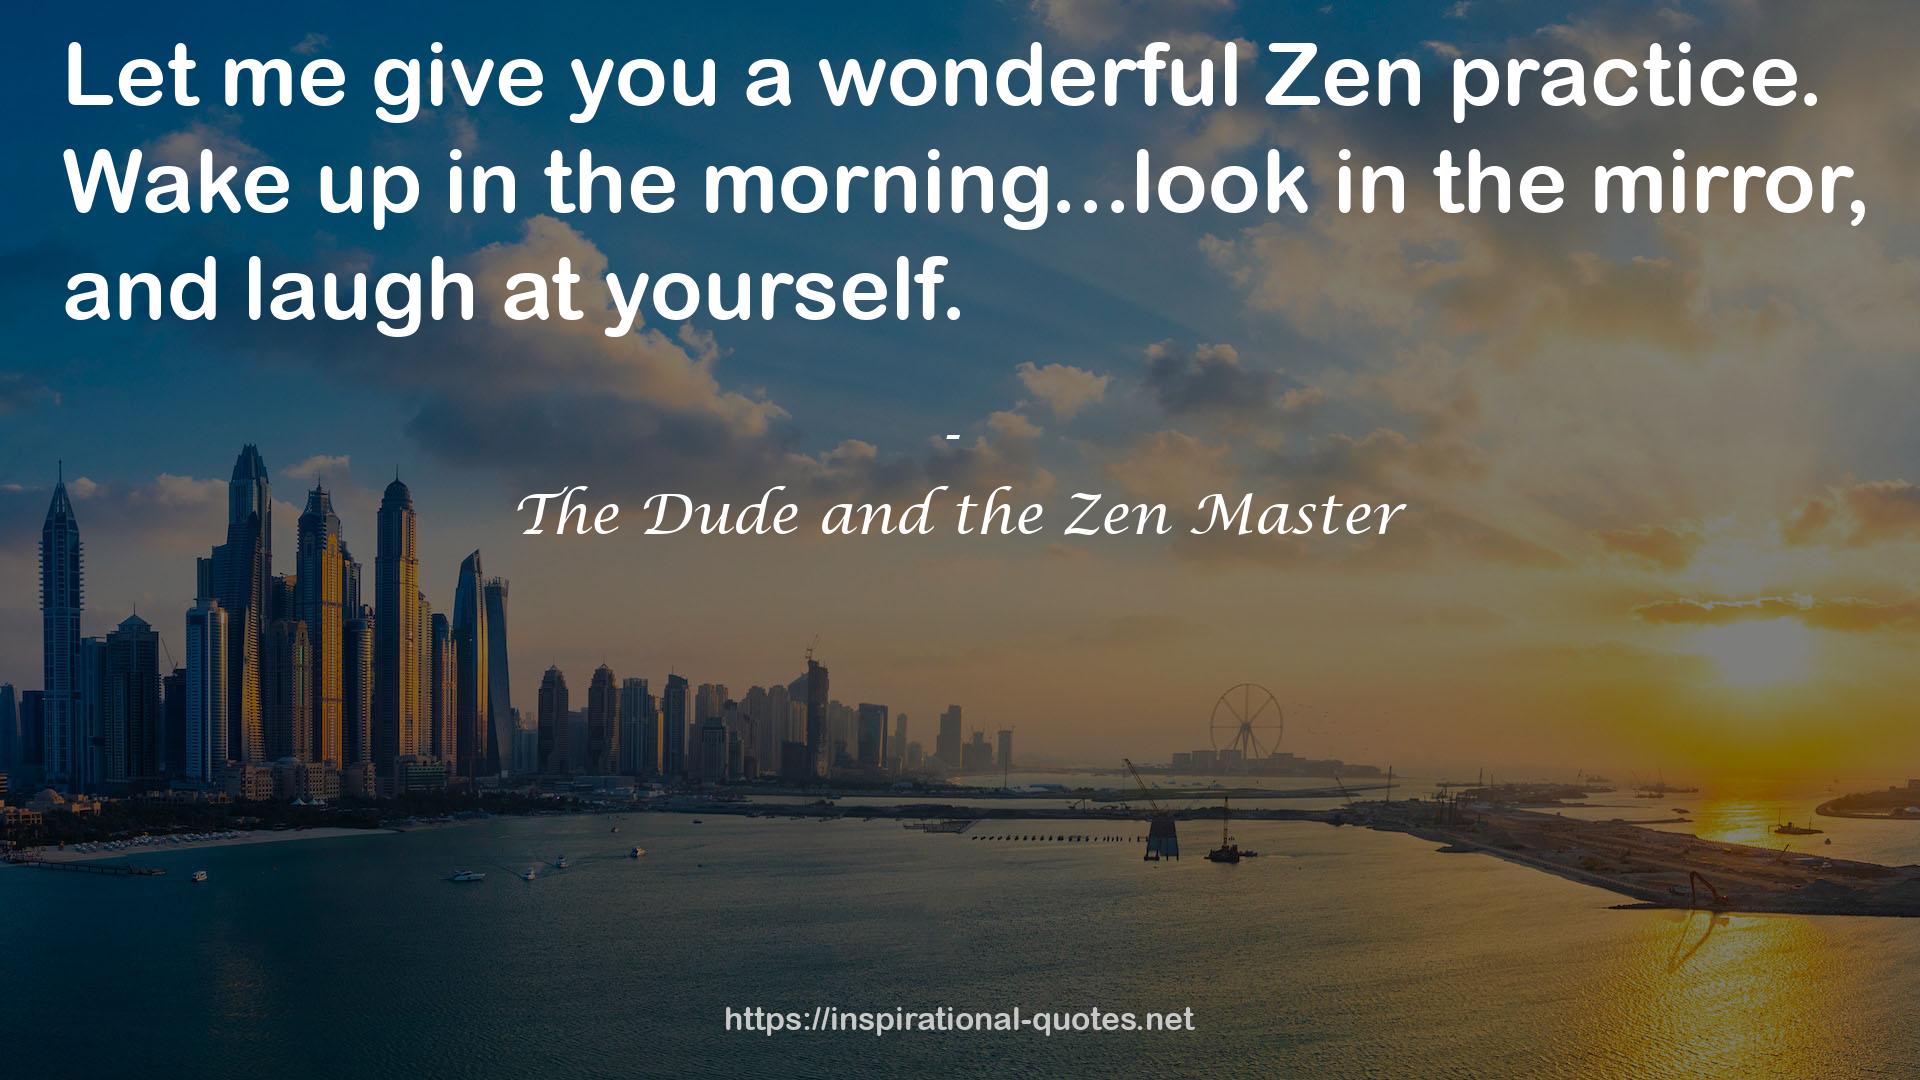 The Dude and the Zen Master QUOTES